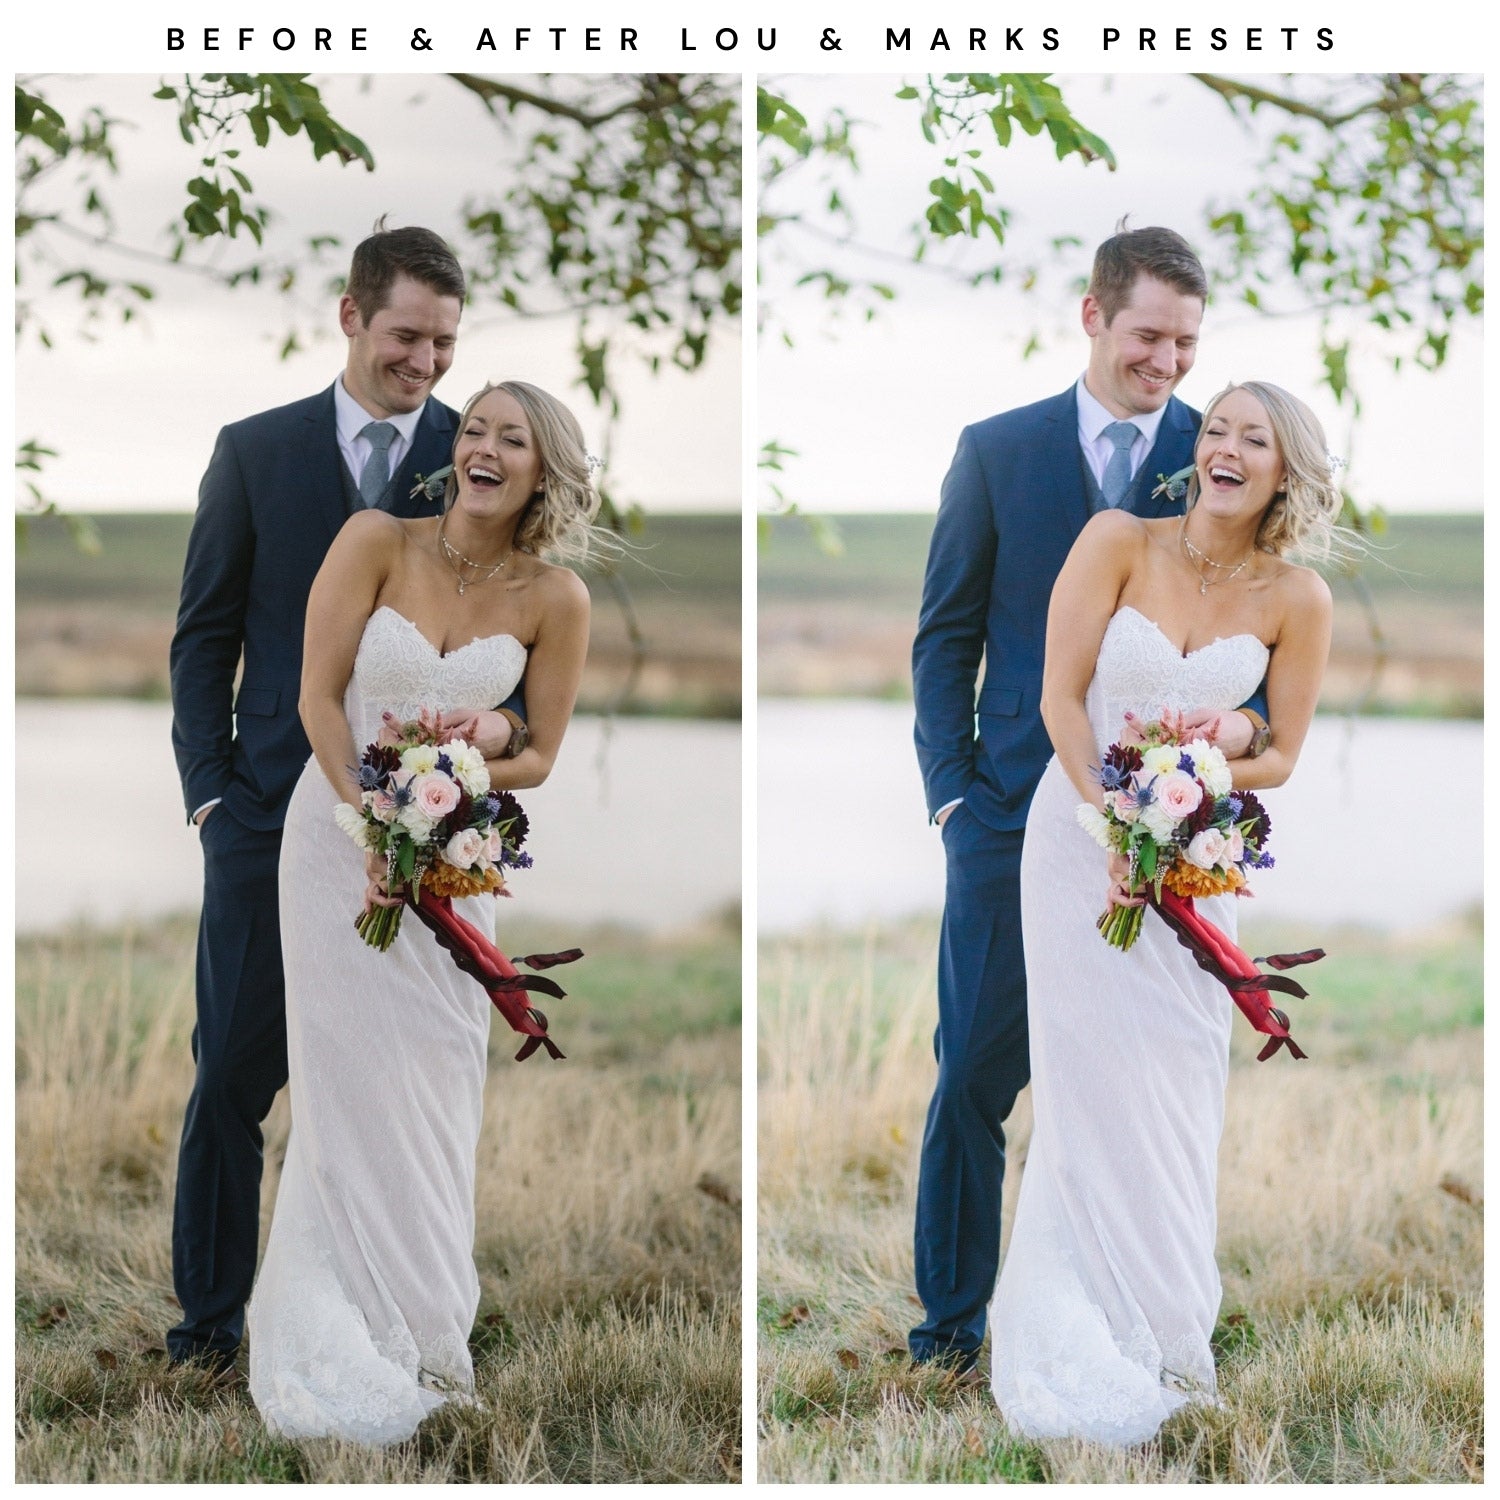 Lou & Marks Presets Light And Airy Lightroom Presets Bundle The Best Presets Wedding Photography